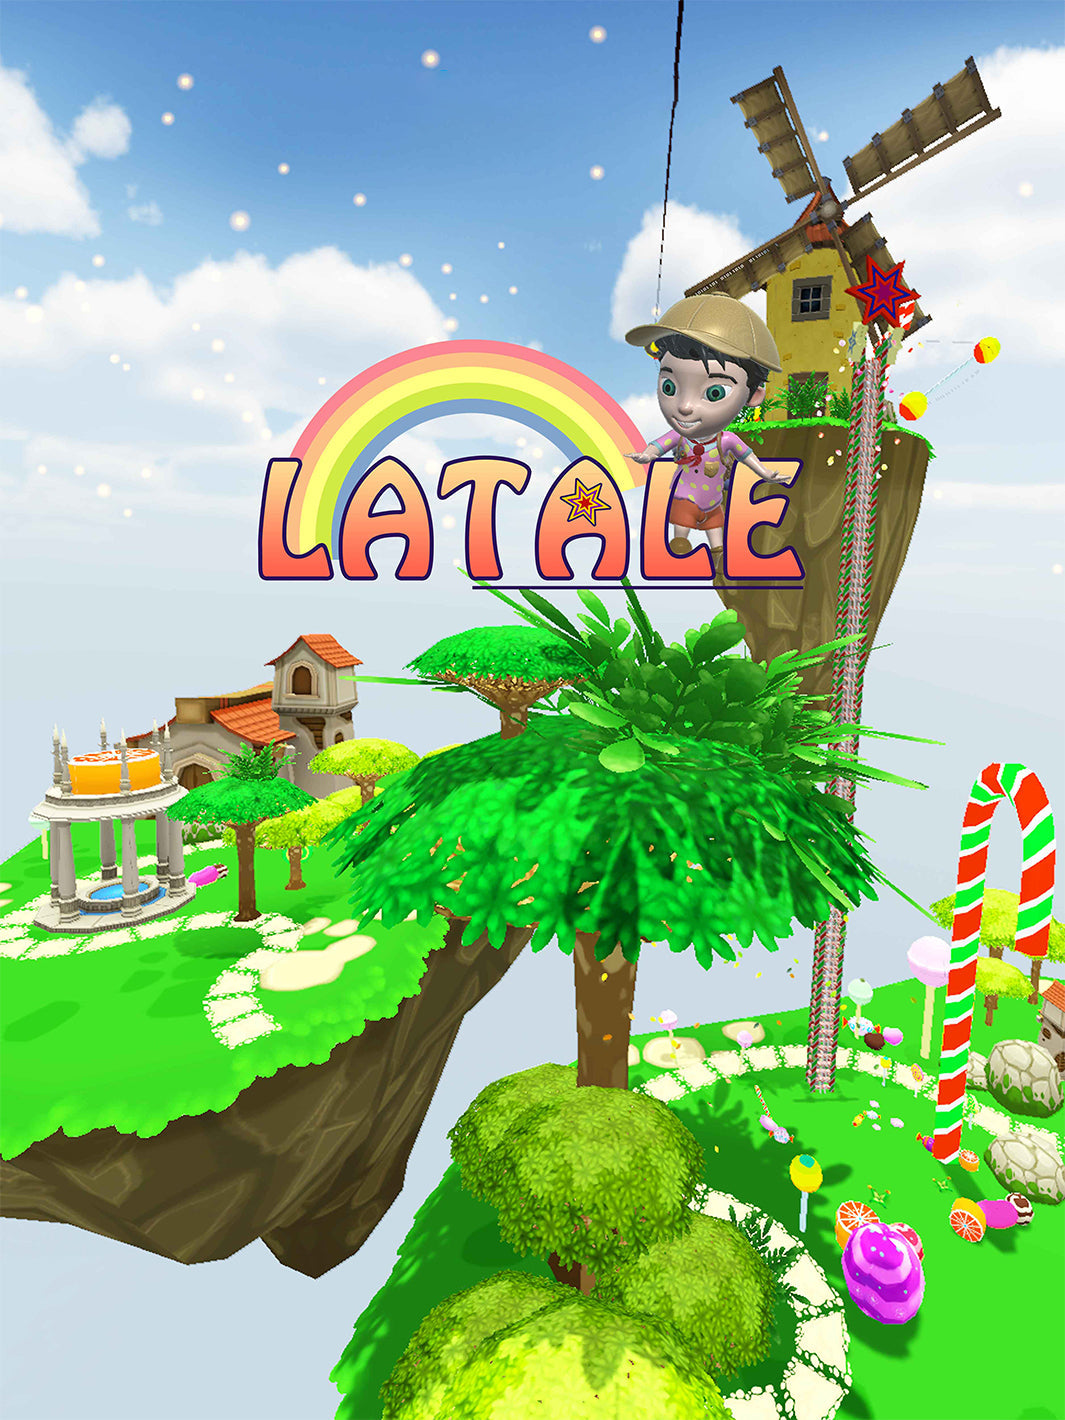 Latale - ShallxR VR game